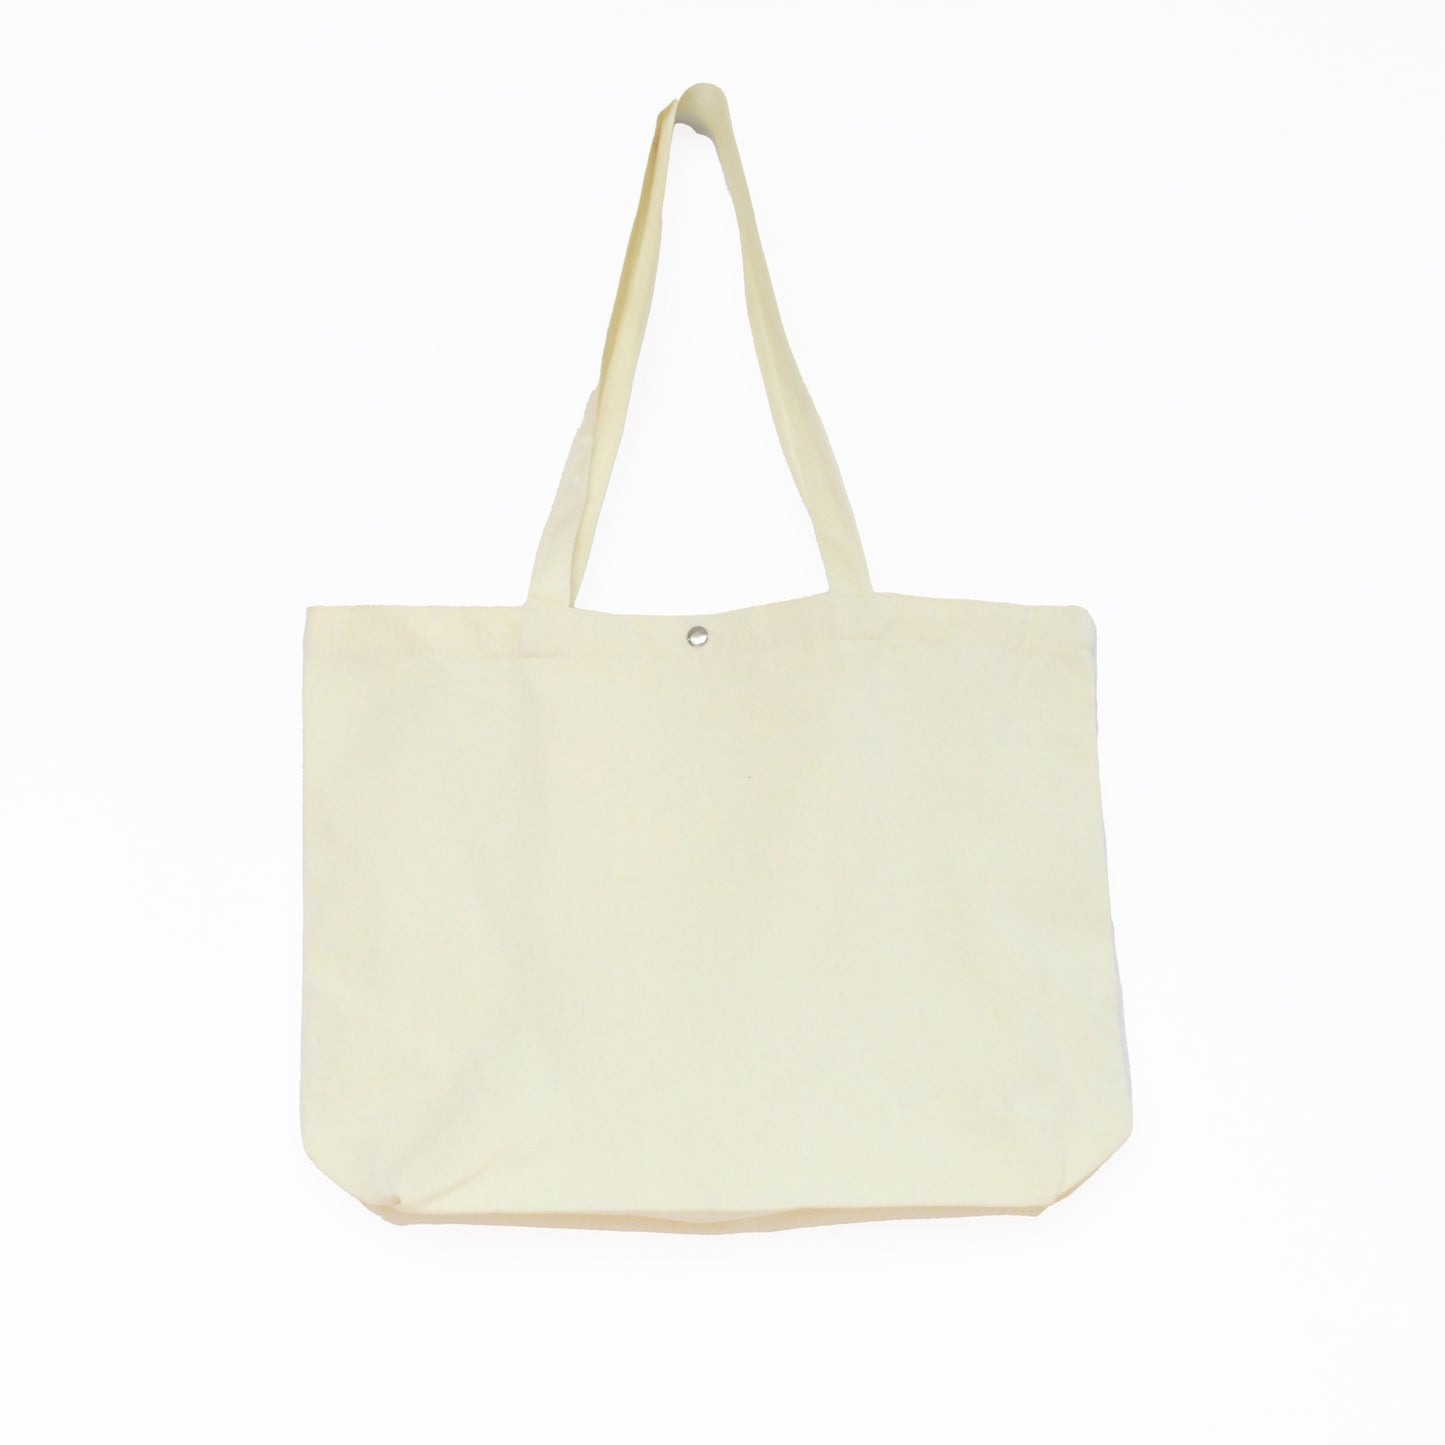 IT IS WHAT IT IS TOTE BAG